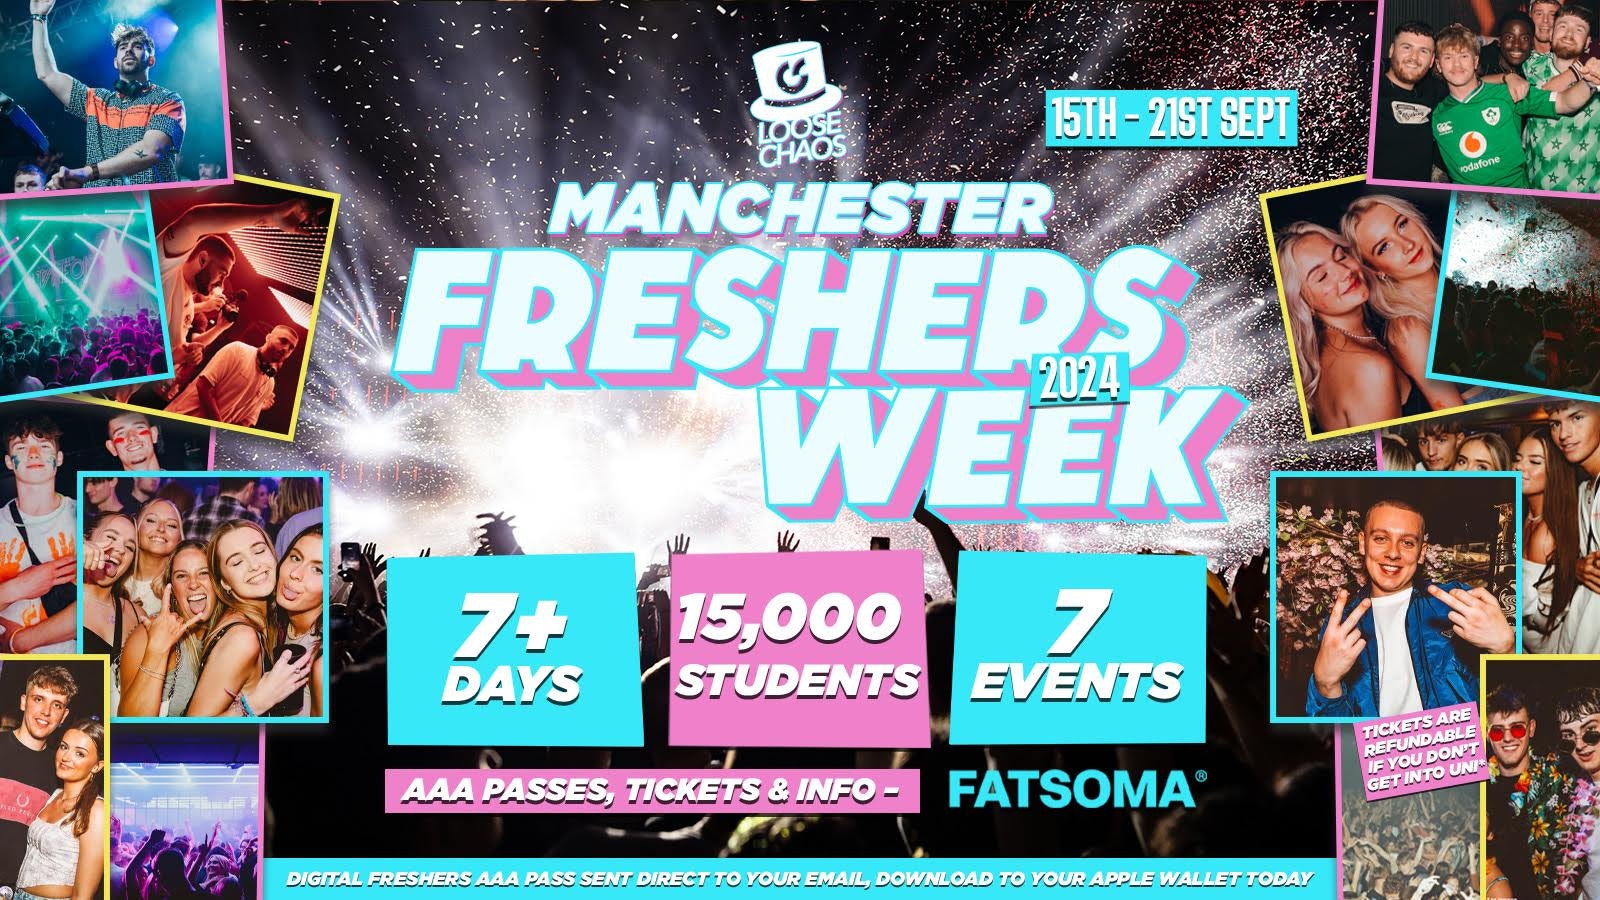 THE LOOSECHAOS MANCHESTER FRESHERS WEEK 🪩💞 7+ EVENTS OVER 7+ DAYS // INCLUDES TROPILOCO – JOSHUA BROOK + ARK & MORE // LESS THAN £1 PER EVENT! UNIVERSITY OF MANCHESTER 2024